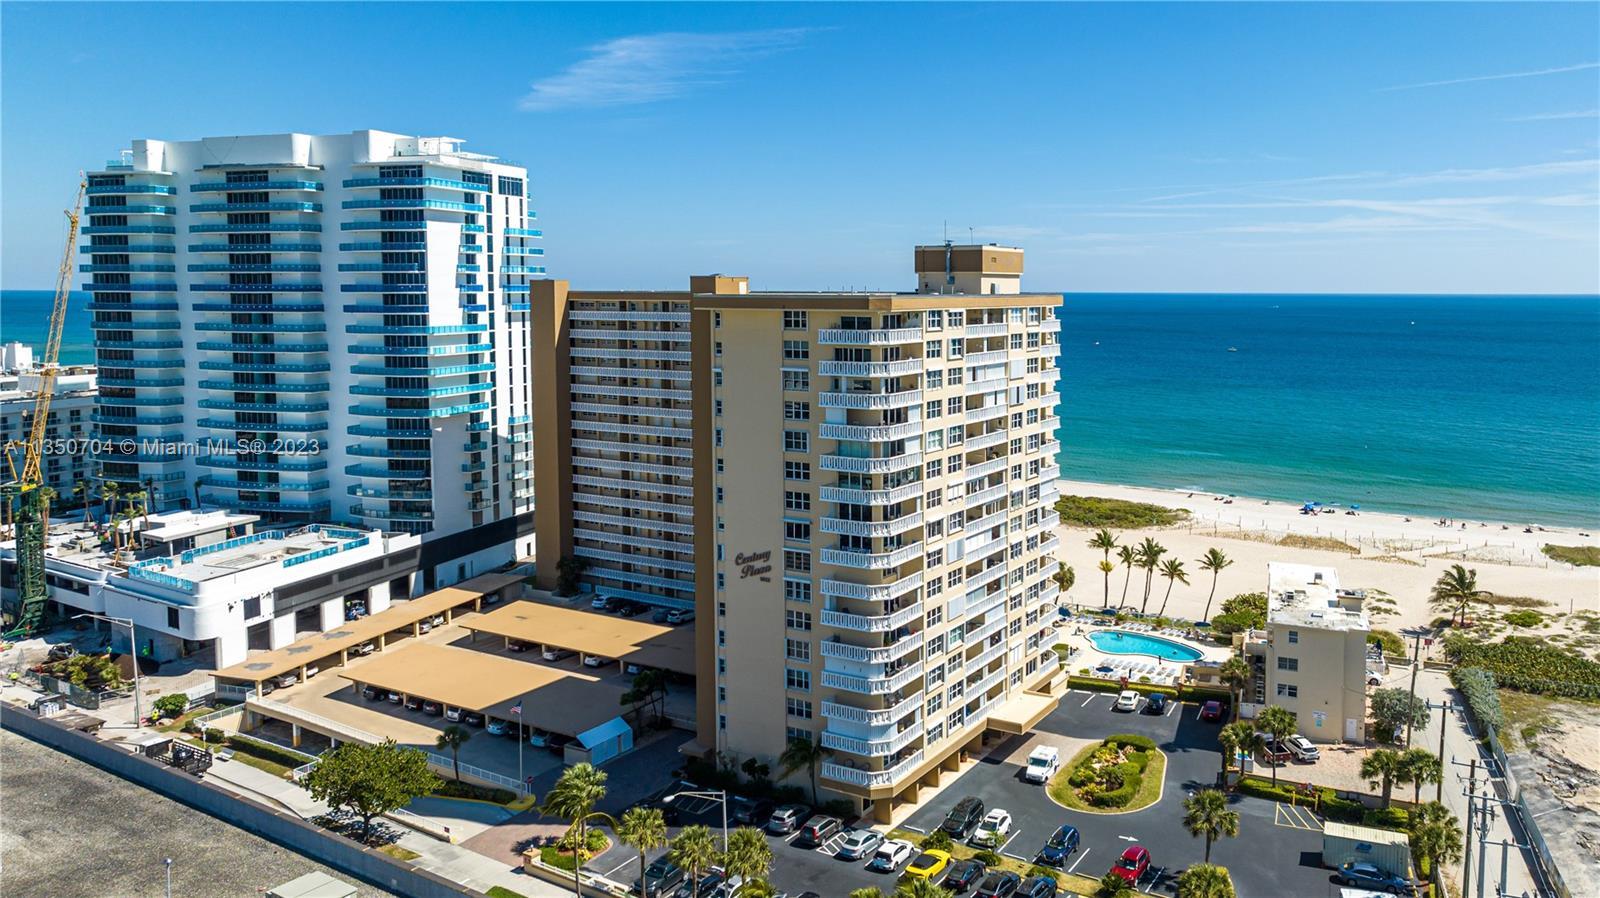 Don't miss this rarely available UPDATED 3 bedroom / 3 Full Bath condo with direct ocean views from 